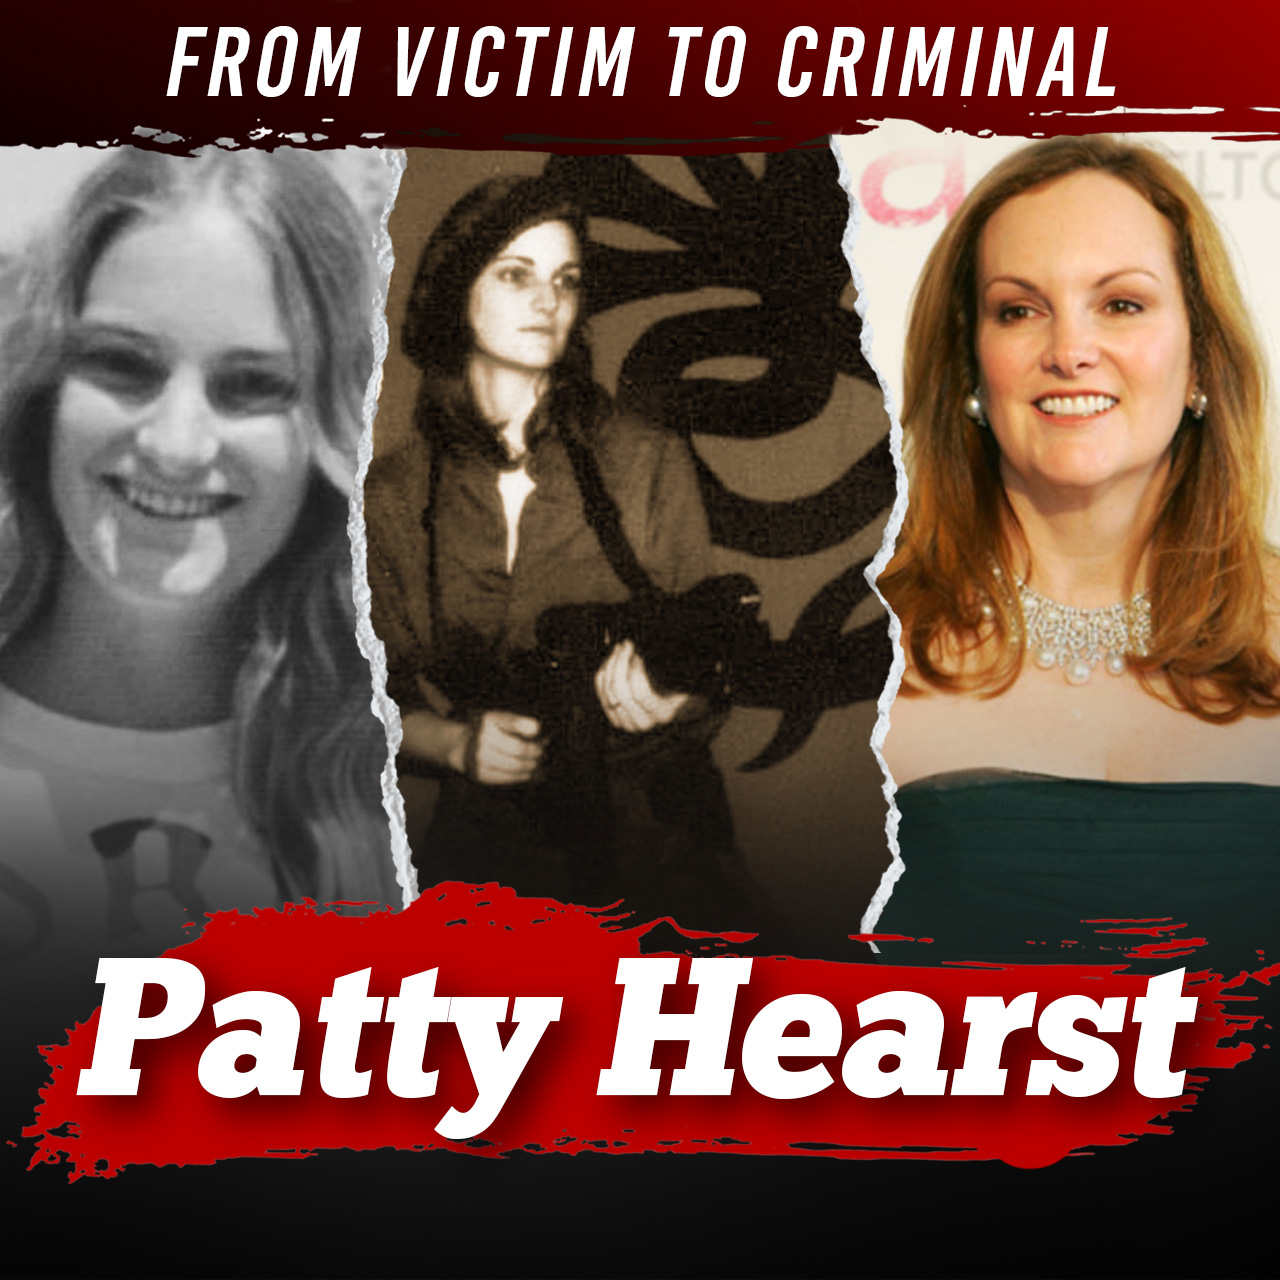 From kidnapped victim to criminal (Stockholm Syndrome?) | Patty Hearst